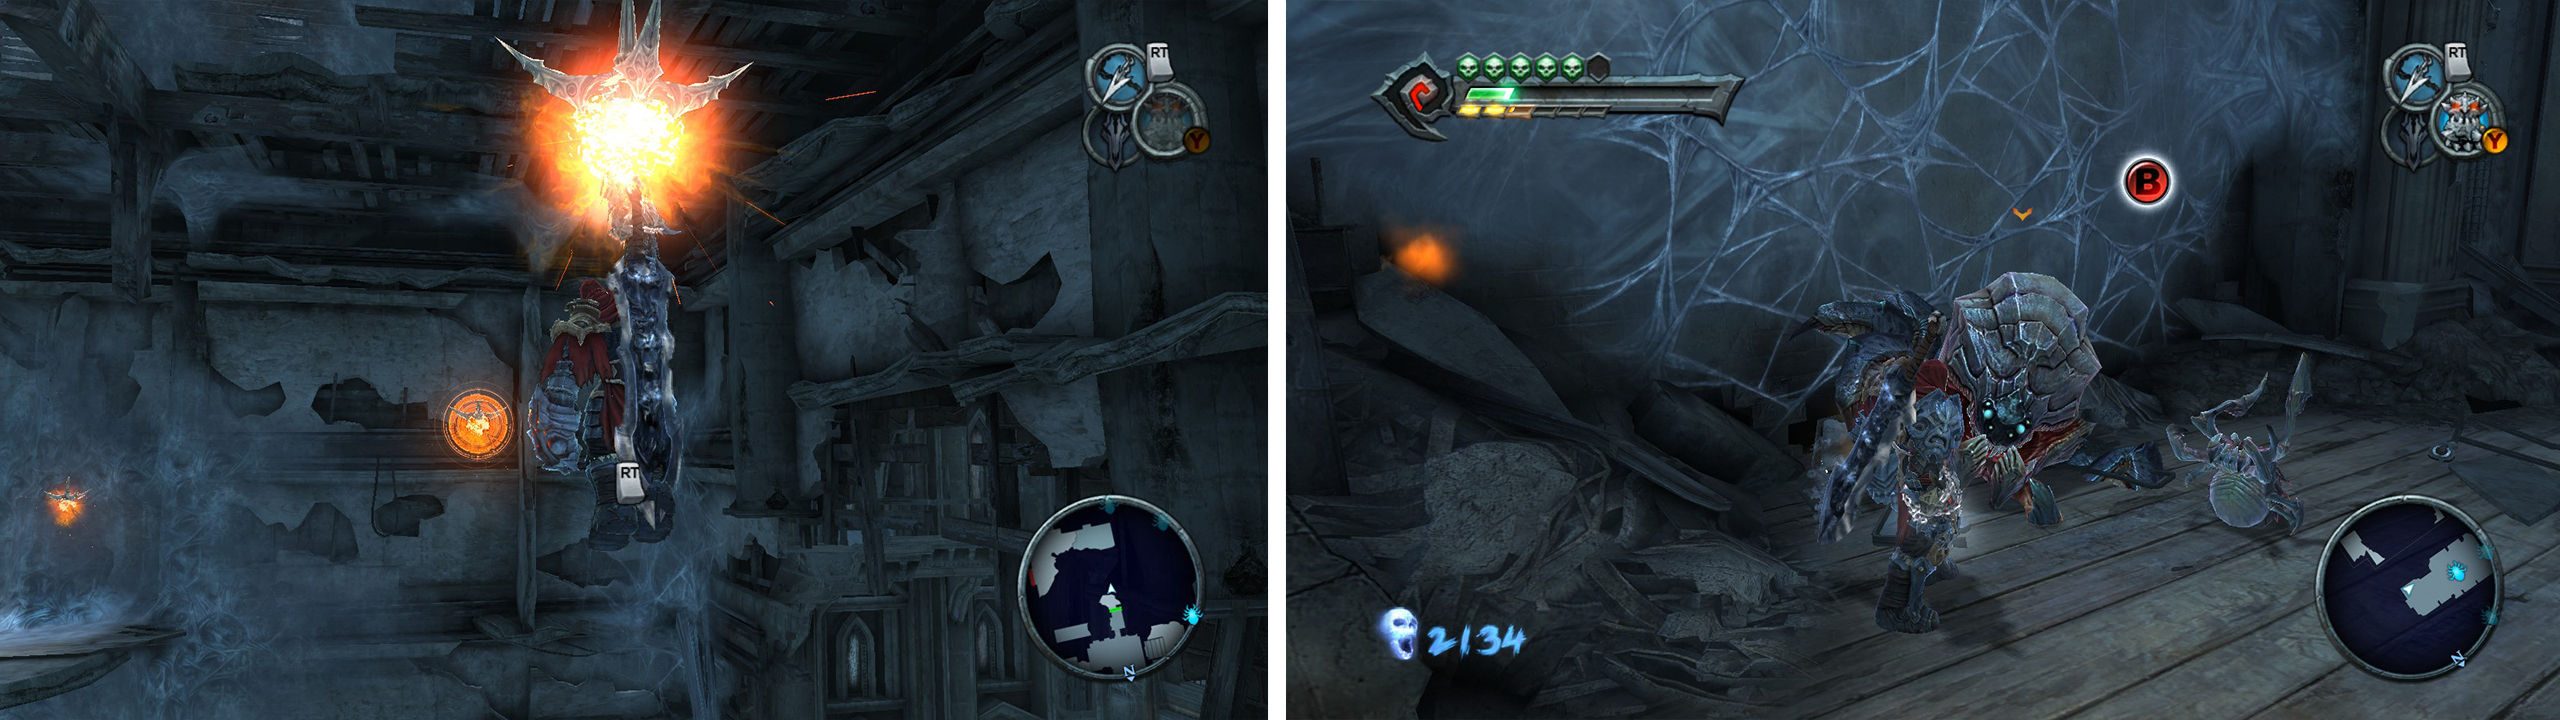 Grapple across the gap (left) and re-enter the previous area to fight another giant spider (right).